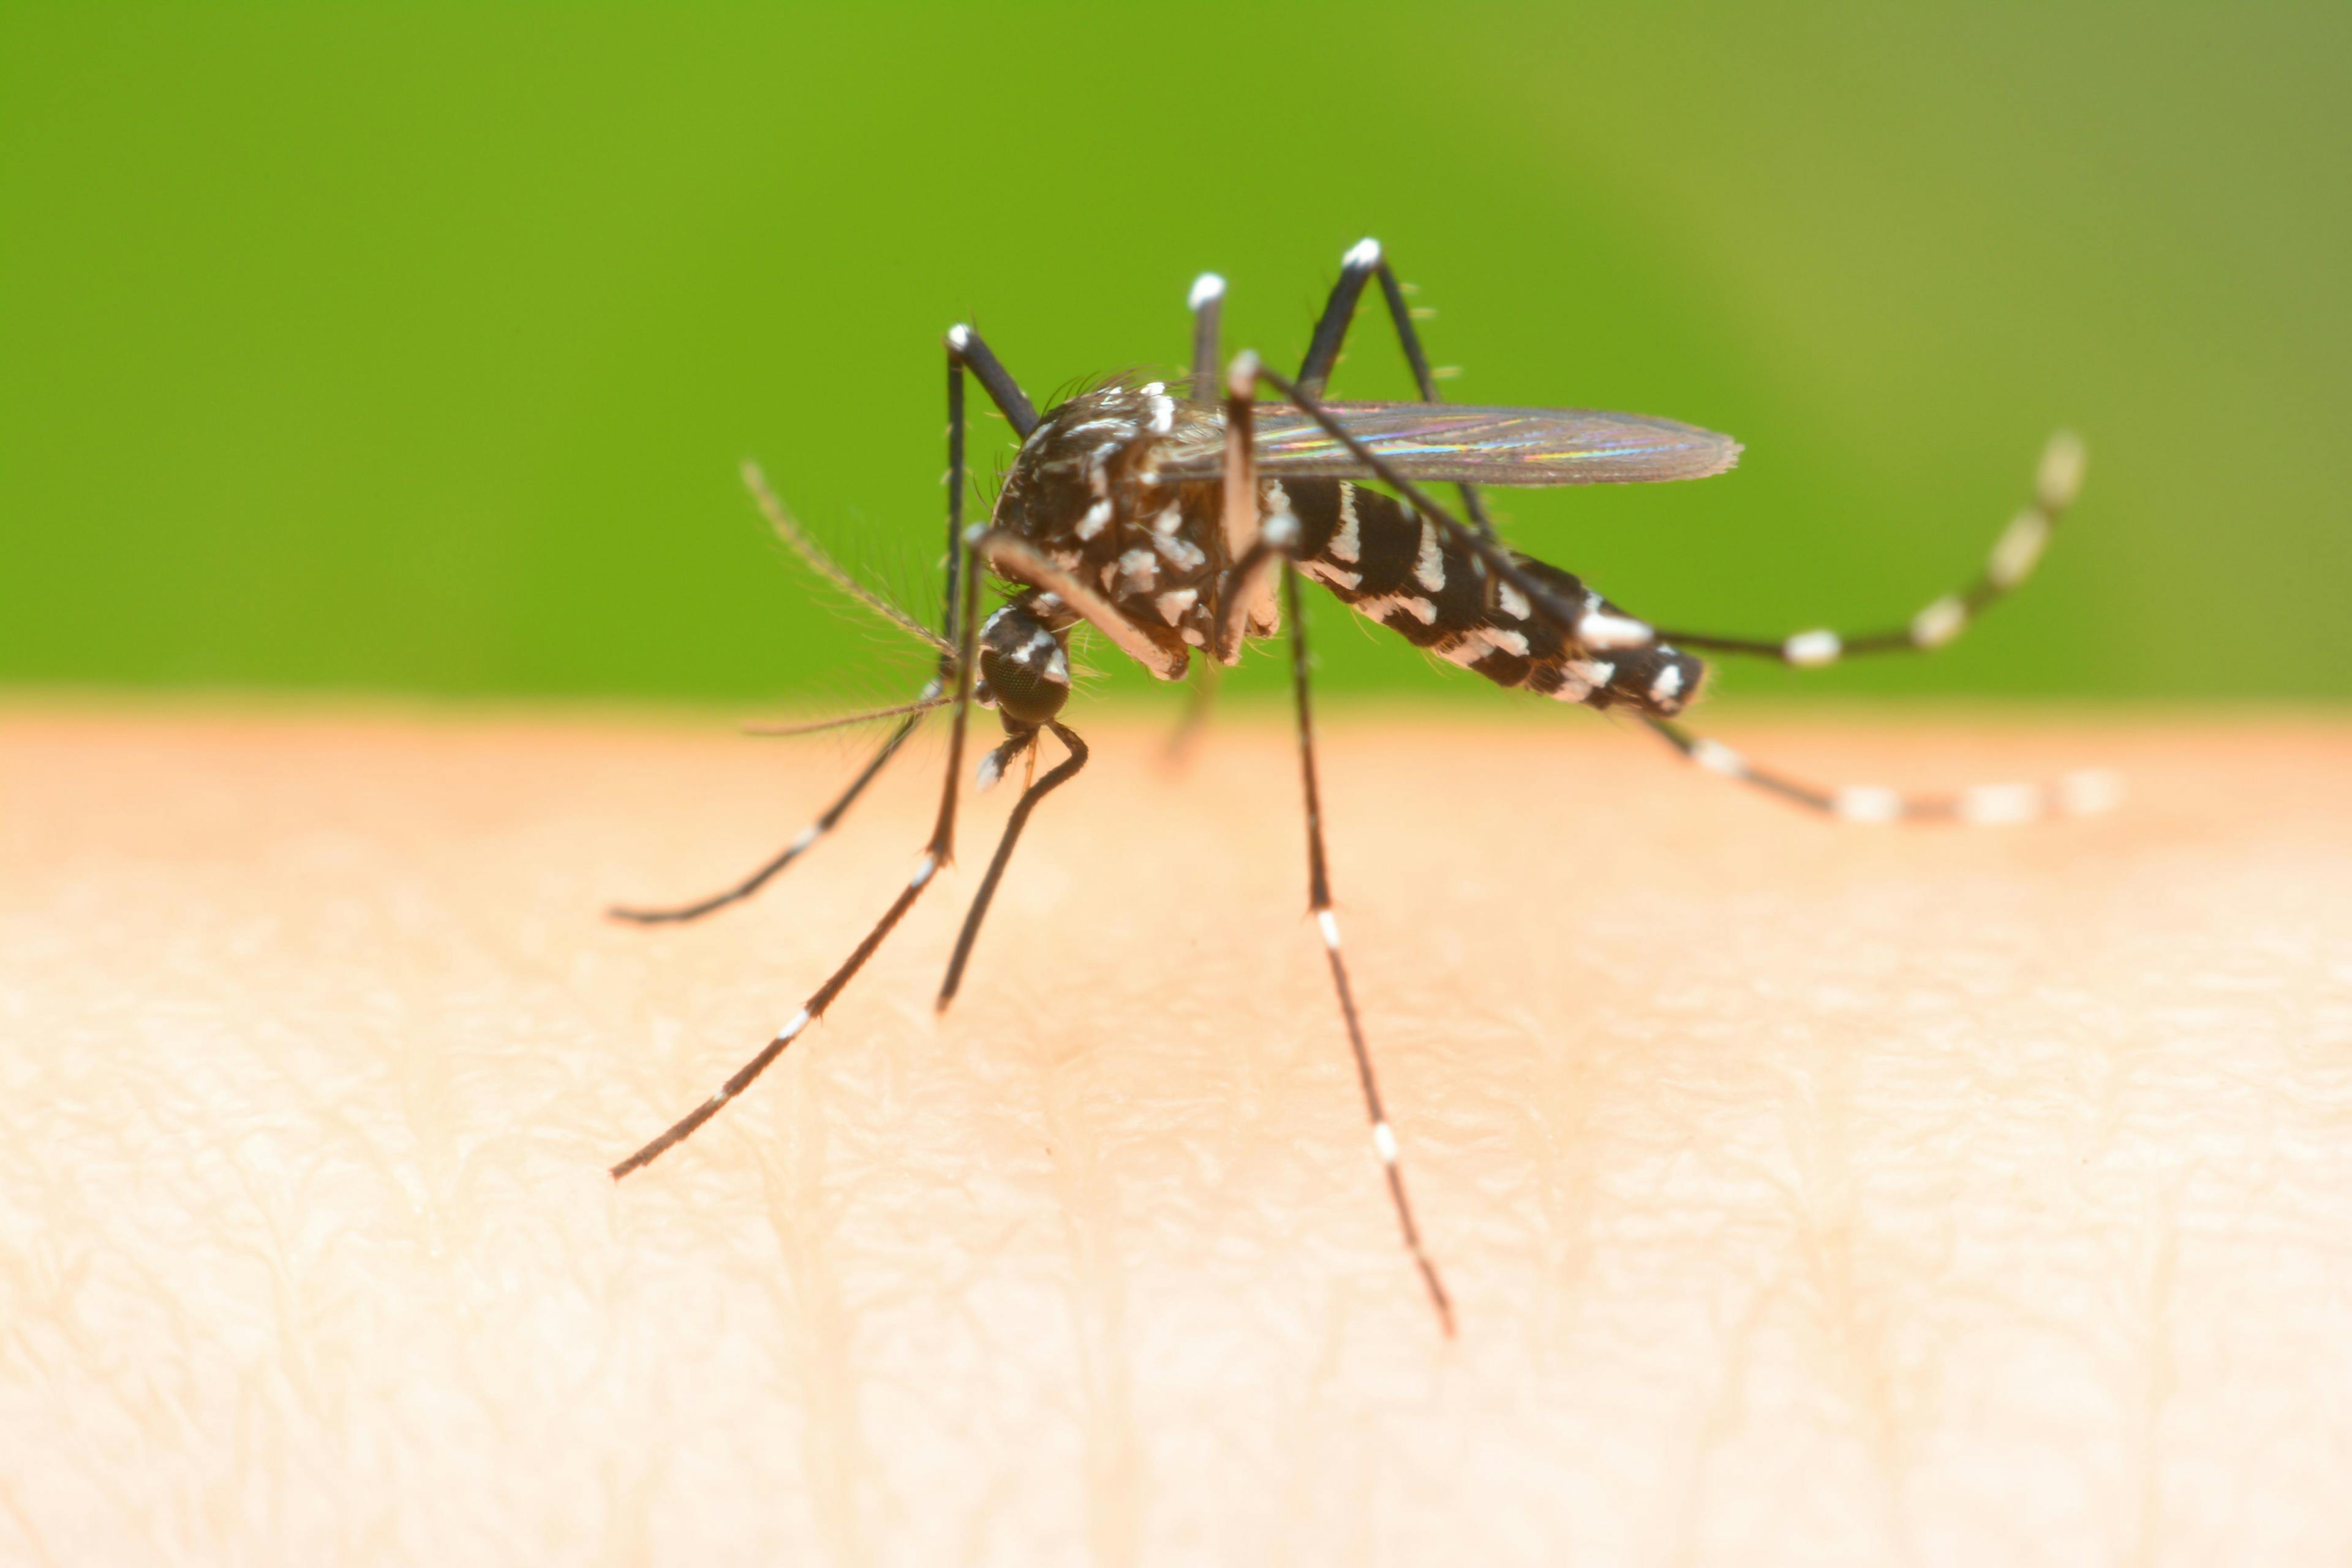 Mosquito on a human hand sucking blood | Image Credit: © bankerfotos - stock.adobe.com